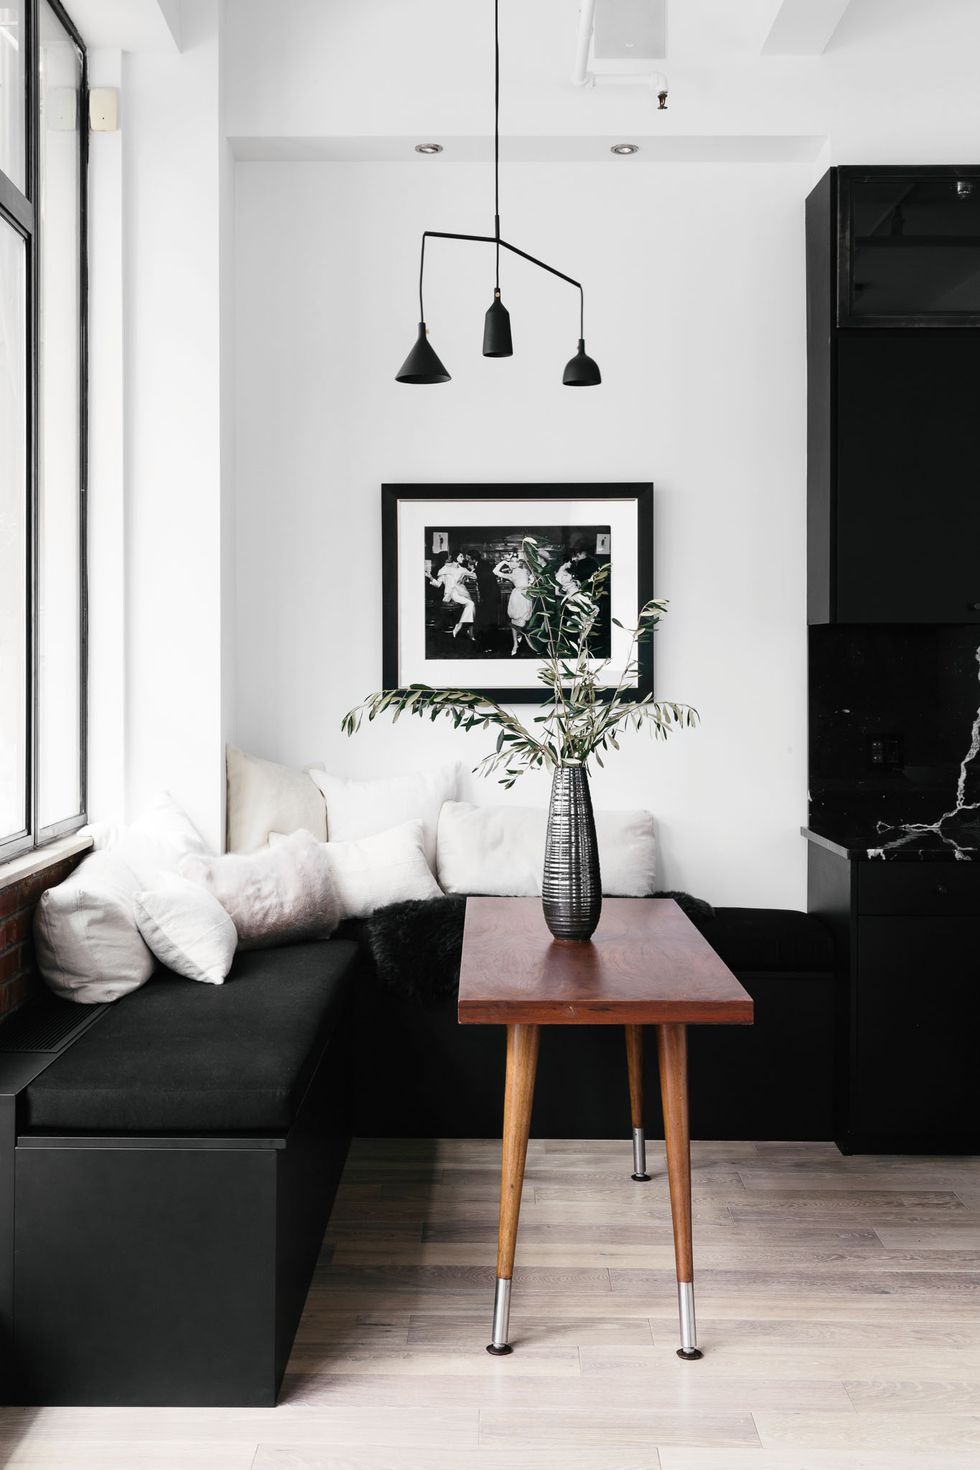 How To Use Black White Decor And Walls, Black And White Living Room Ideas With Accent Color